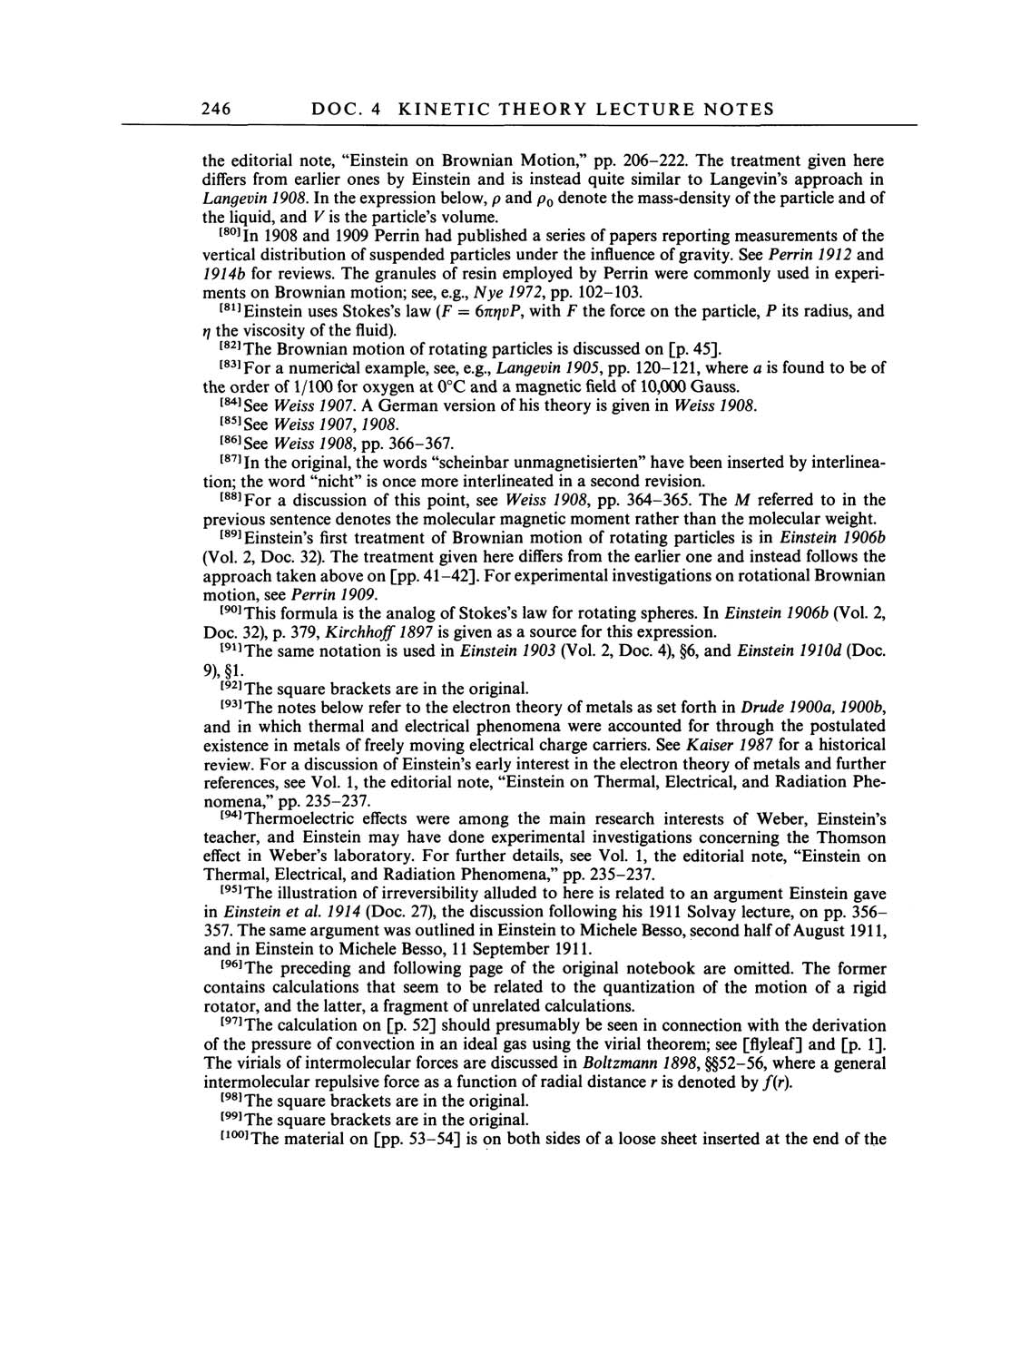 Volume 3: The Swiss Years: Writings 1909-1911 page 246